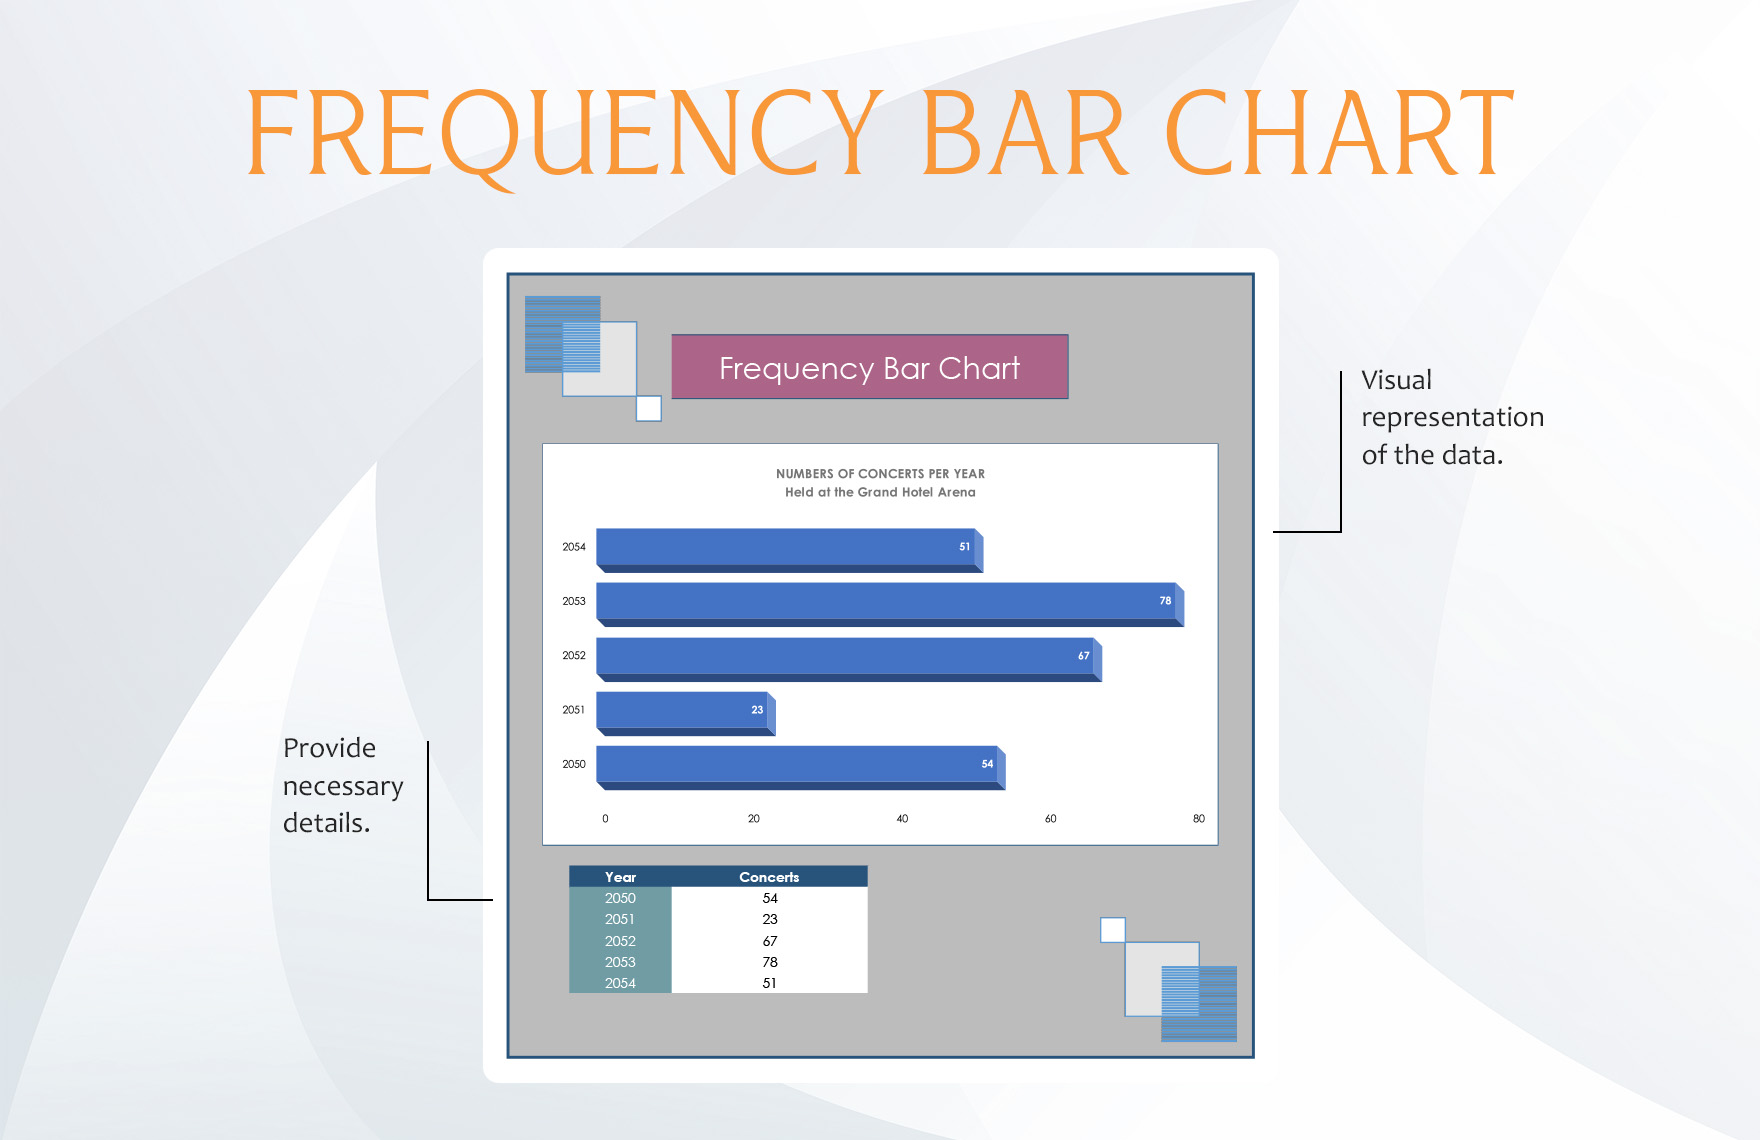 Frequency Bar Chart Template